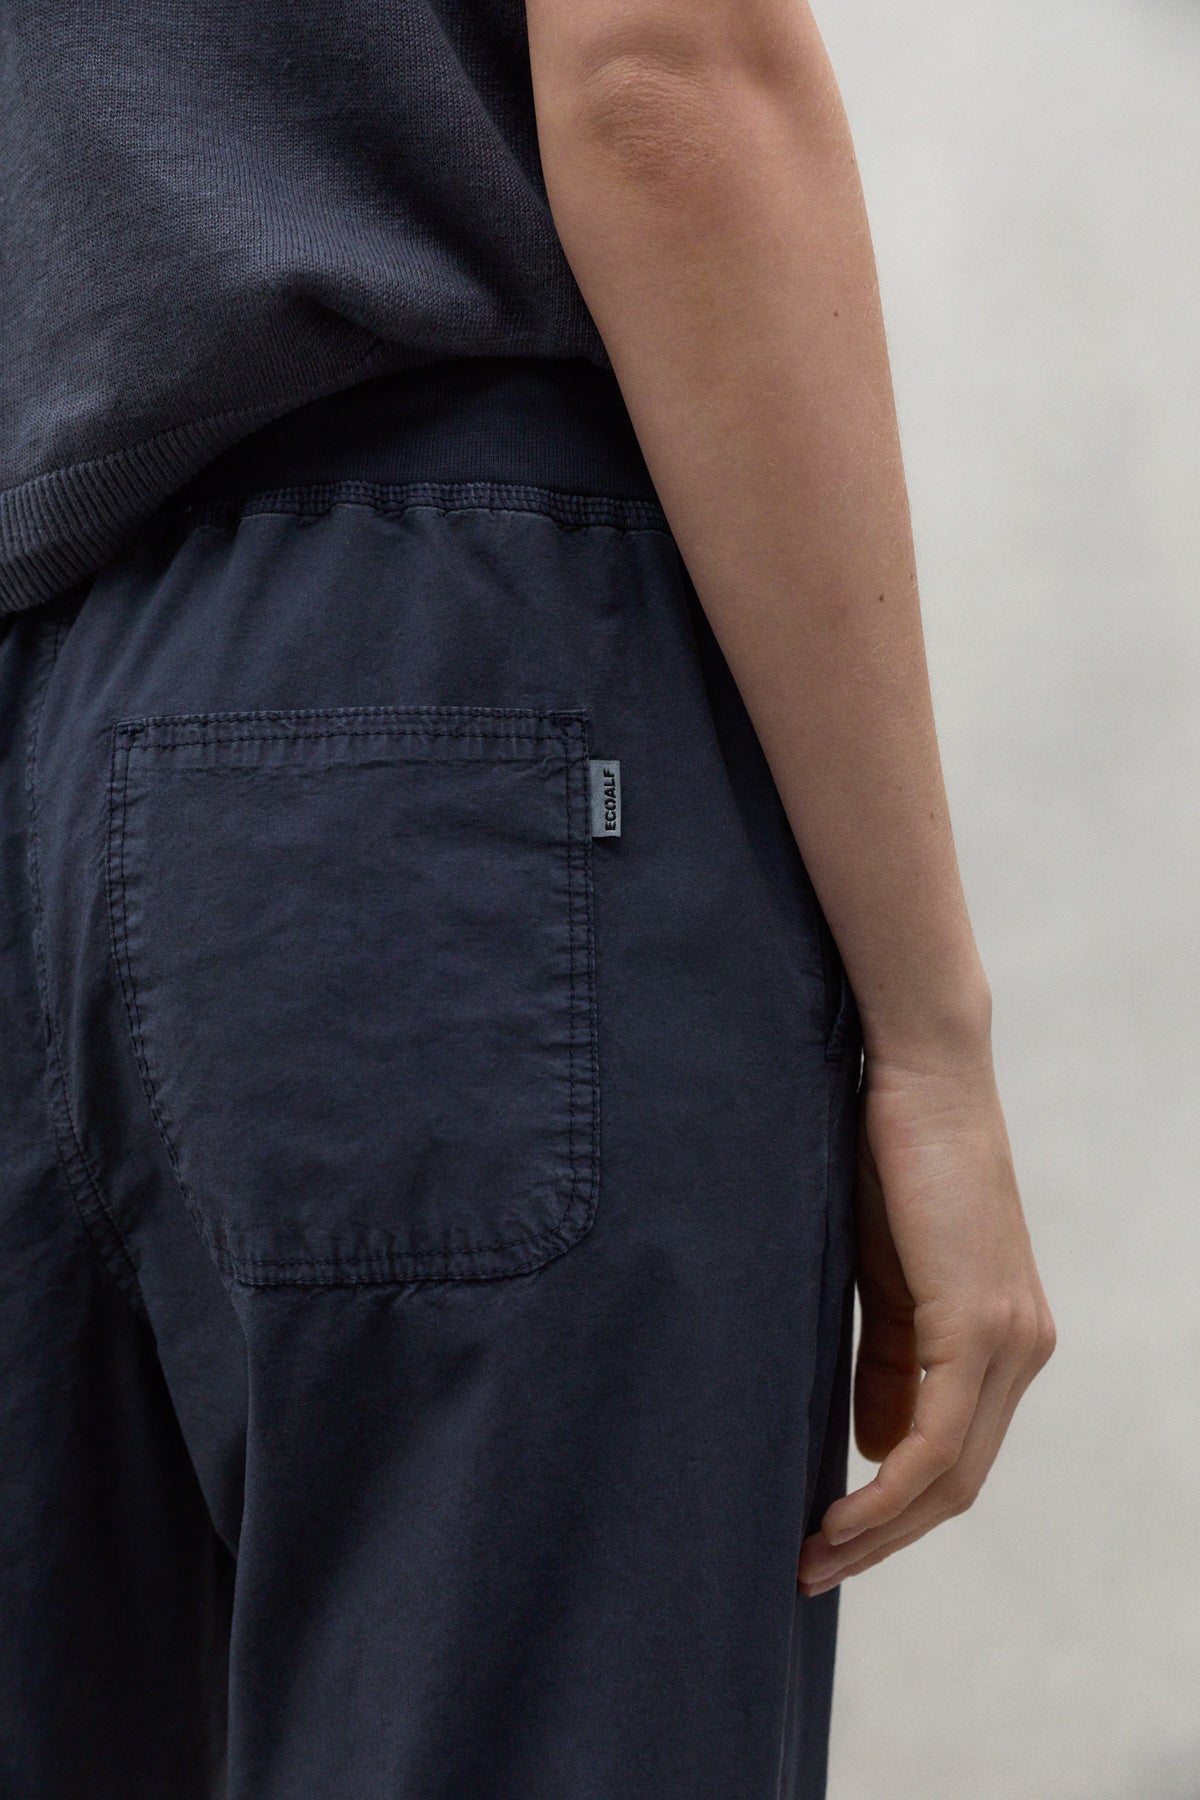 NAVY BLUE GANGES TROUSERS